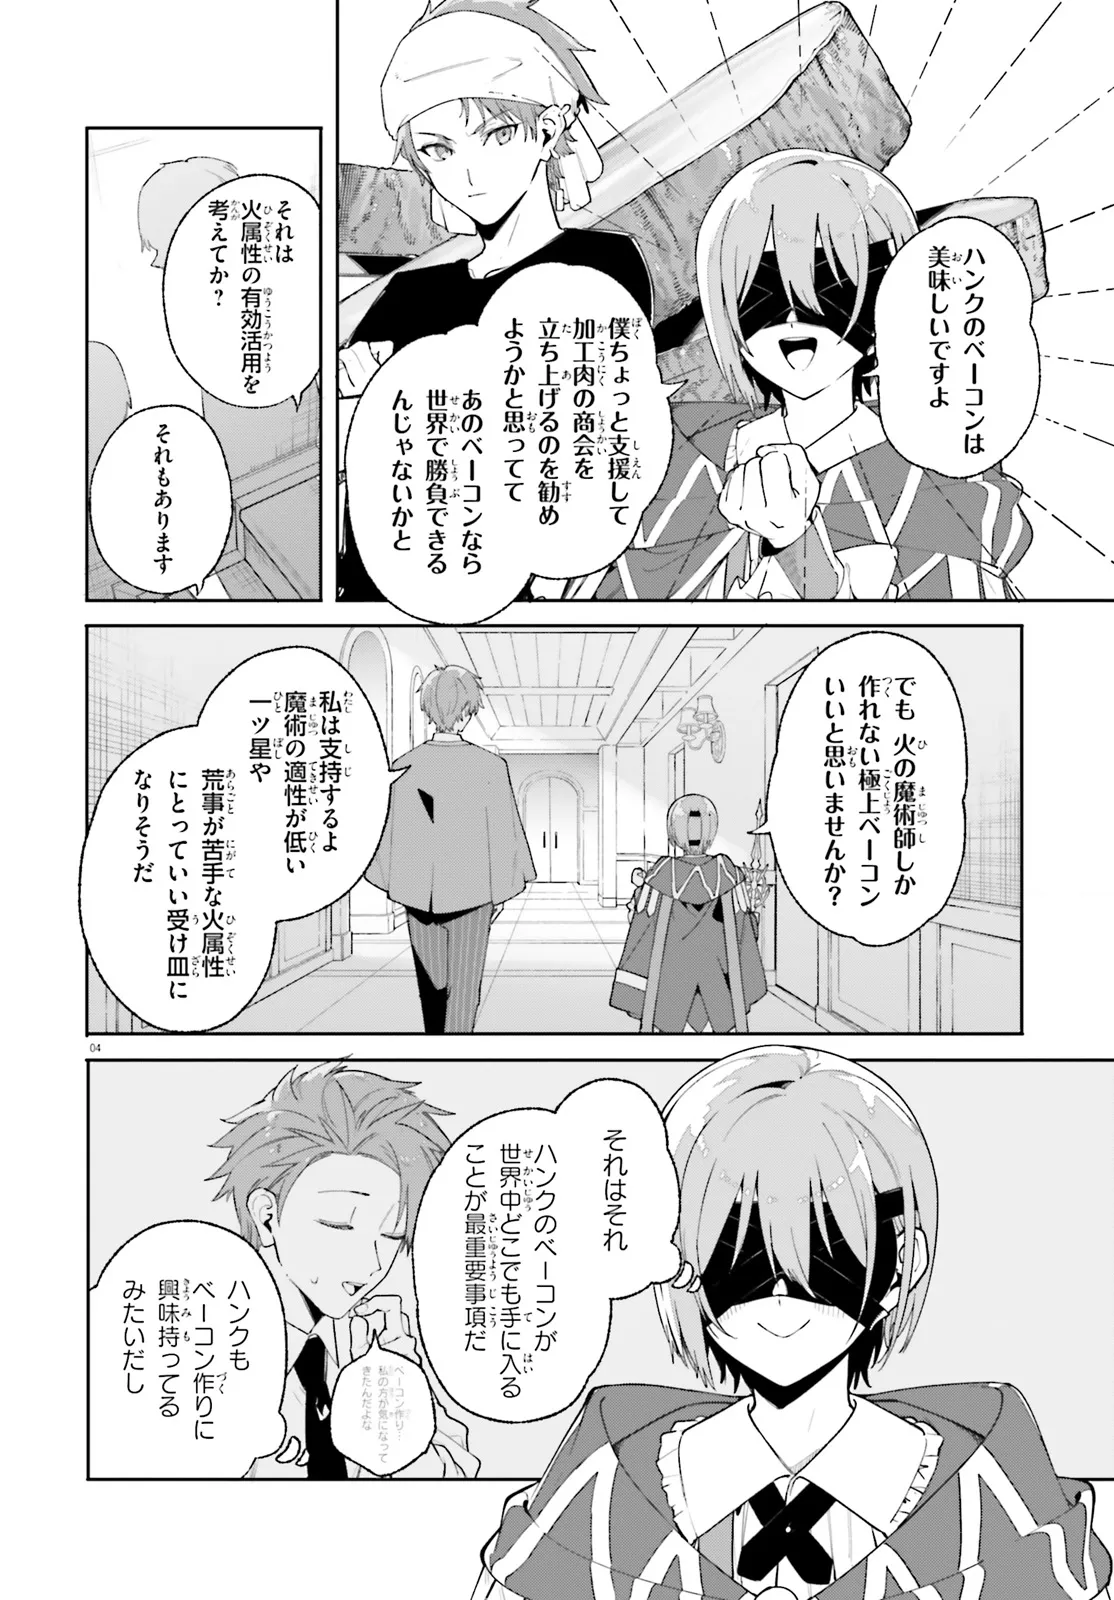 Kunon the Sorcerer Can See Kunon the Sorcerer Can See Through 魔術師クノンは見えている 第27.1話 - Page 4